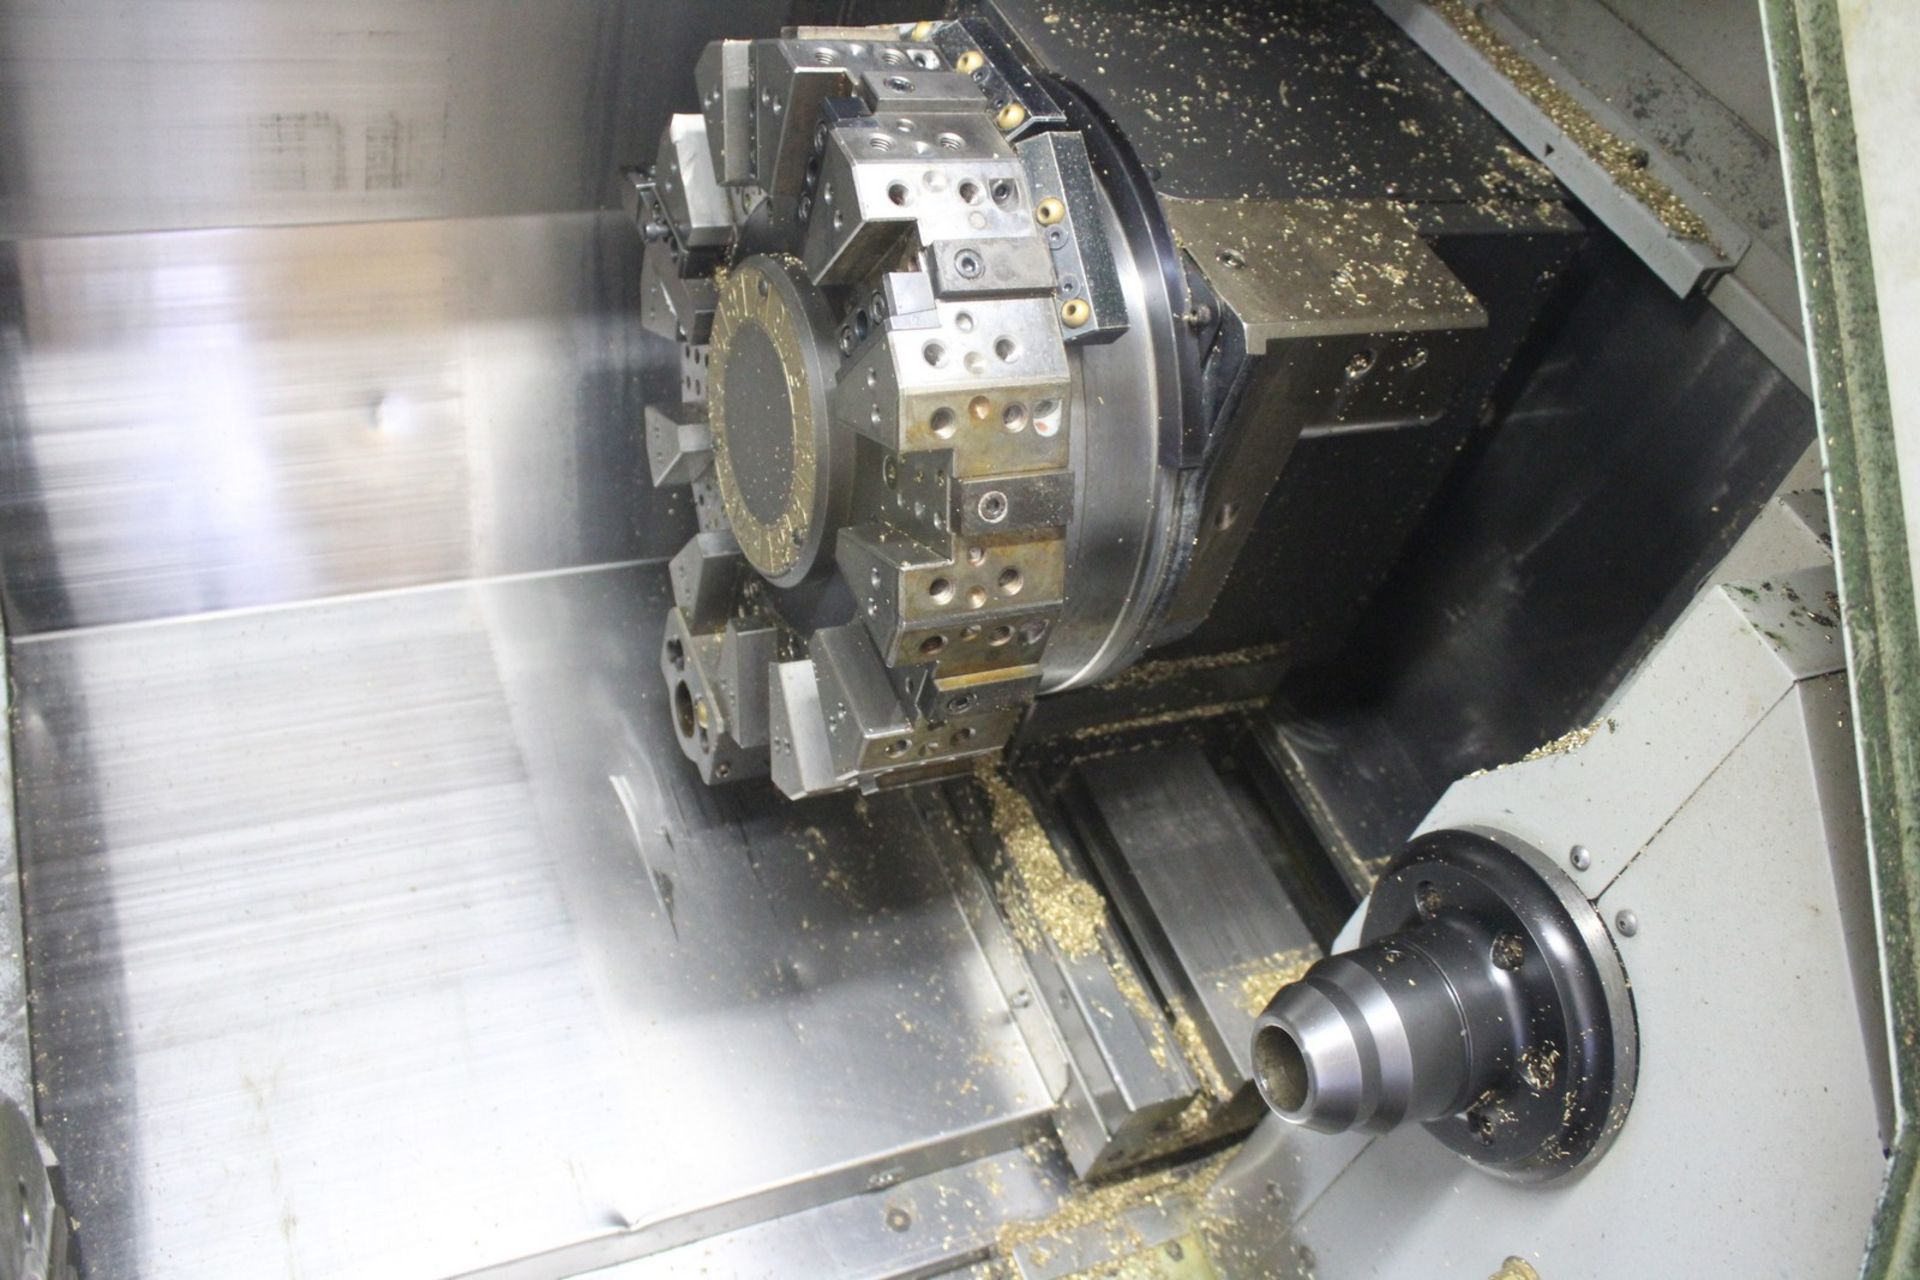 MORI SEIKI SL204S/500 CNC TURNING CENTER S/N SL200CG1783, SUB SPINDLE,9.3"X-AXIS TRAVEL,19.5" Z-AXIS - Image 4 of 6